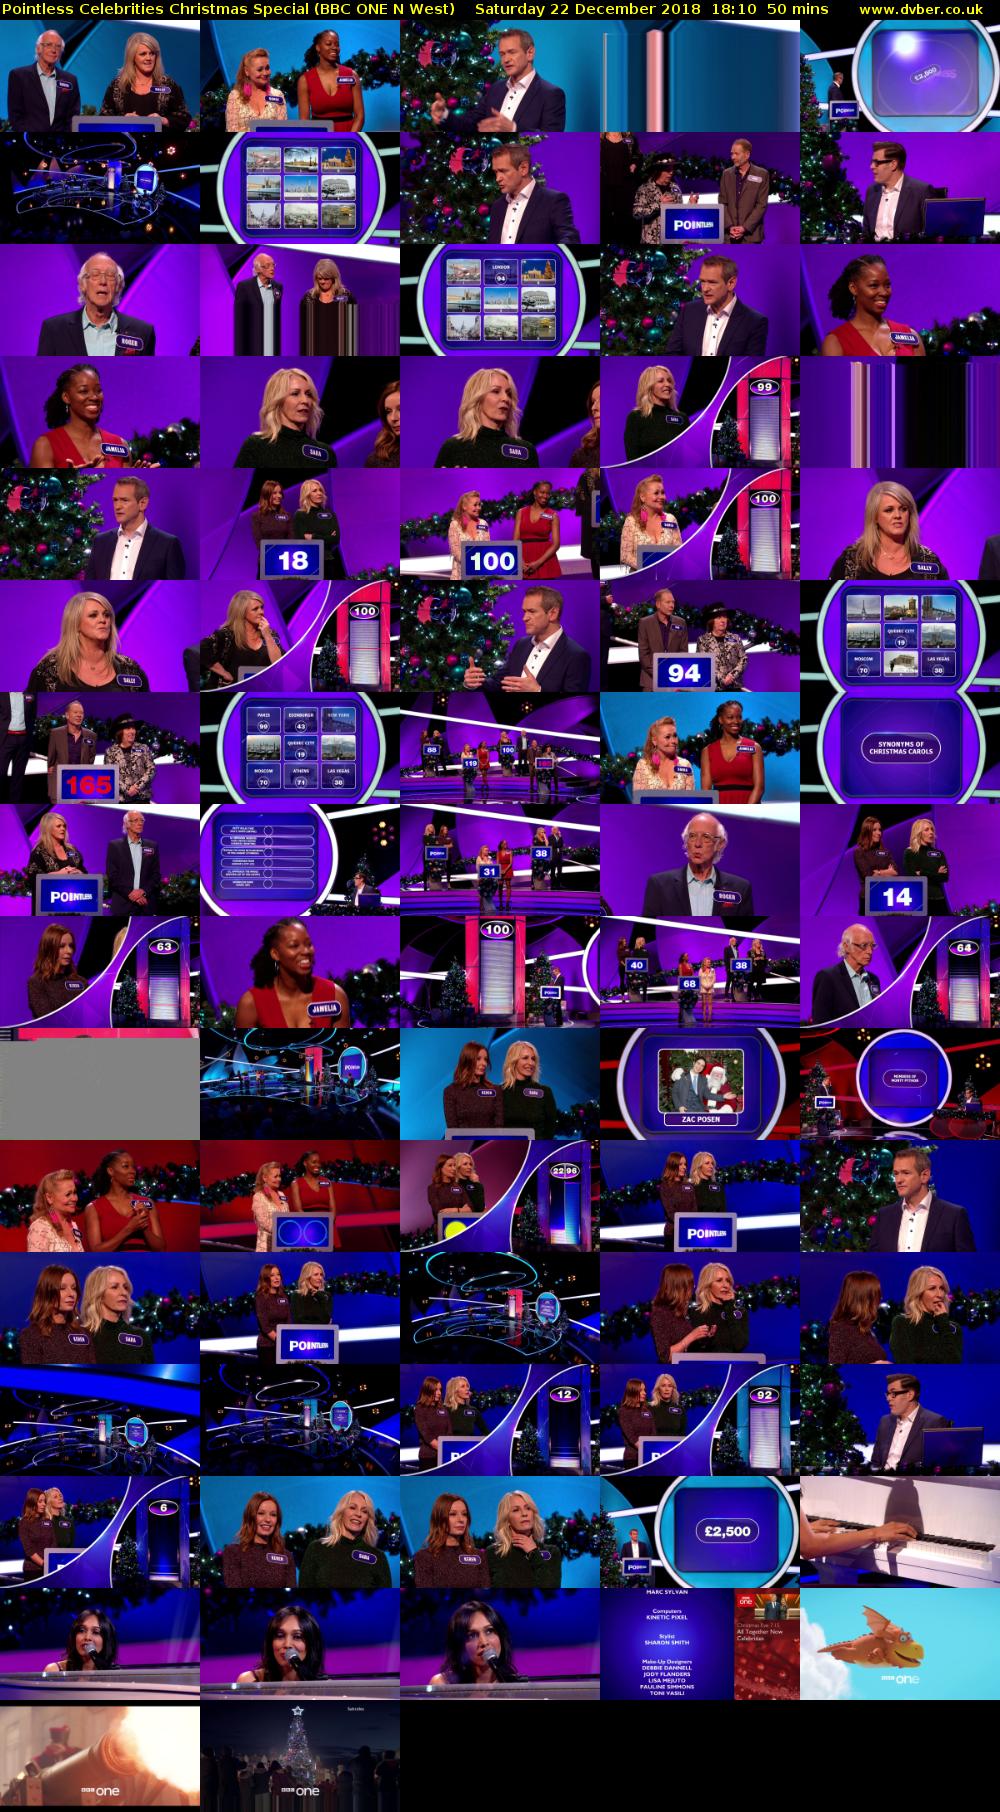 Pointless Celebrities Christmas Special (BBC ONE N West) Saturday 22 December 2018 18:10 - 19:00